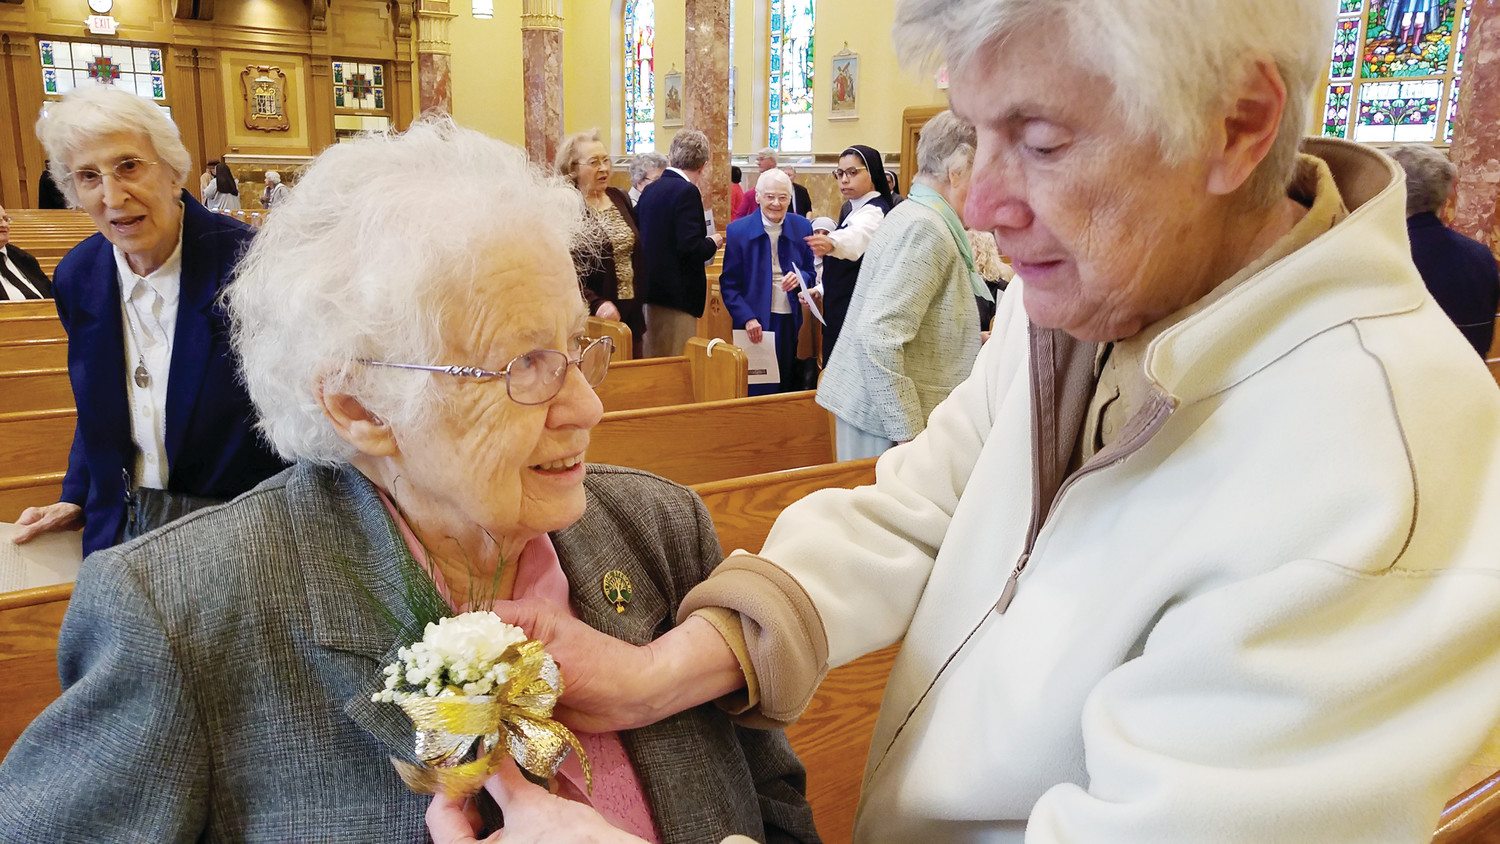 Before Mass, sisters help one another with their corsages in celebration of their many years of service.